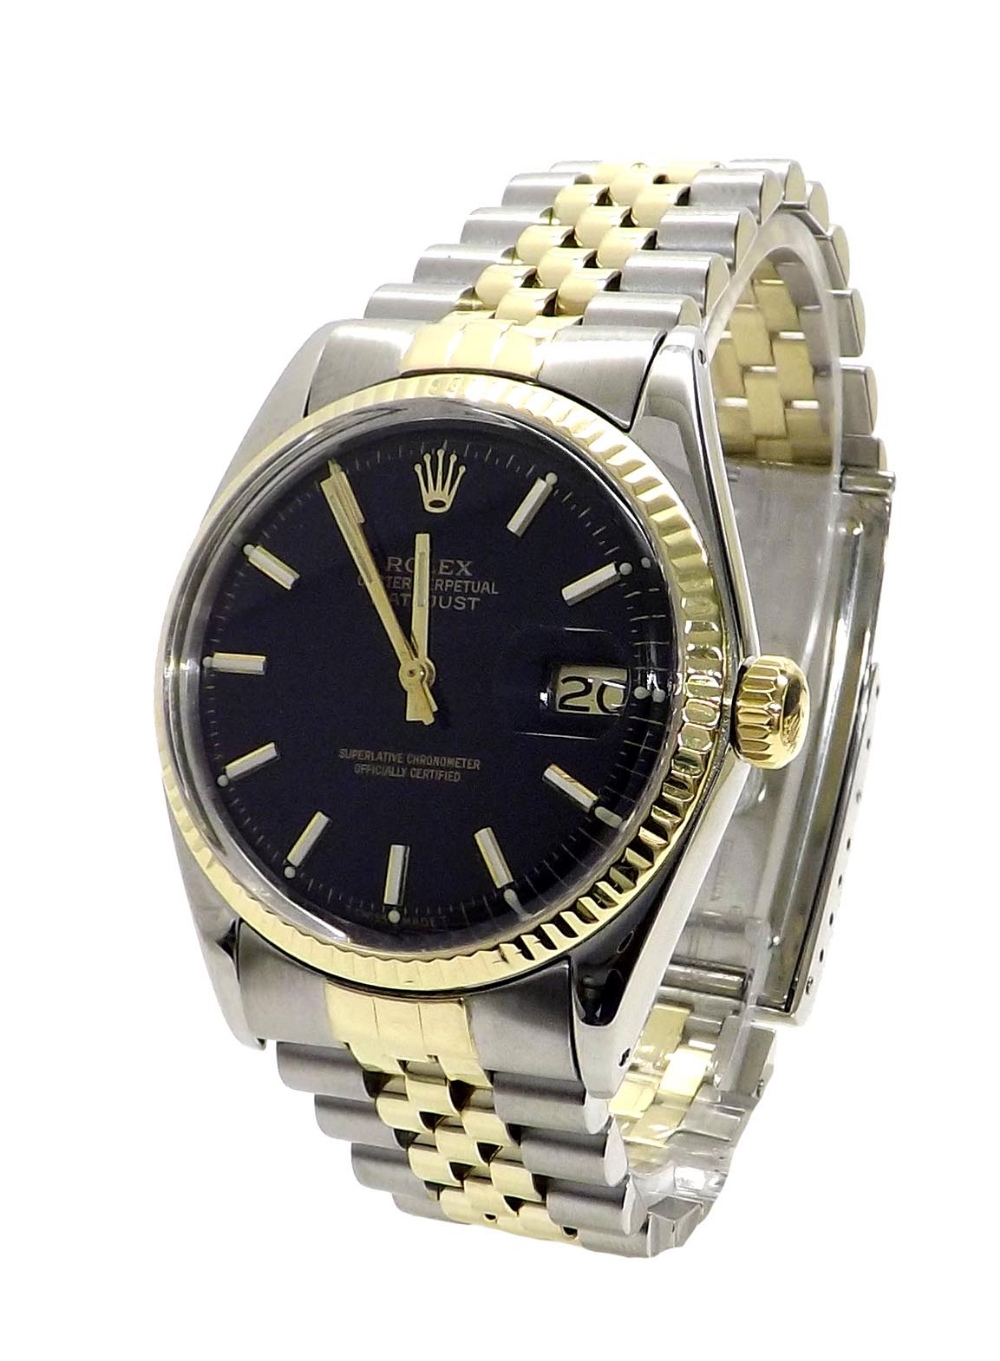 Rolex Oyster Perpetual Datejust stainless steel and gold gentleman's bracelet watch, ref. 1601, - Image 2 of 3